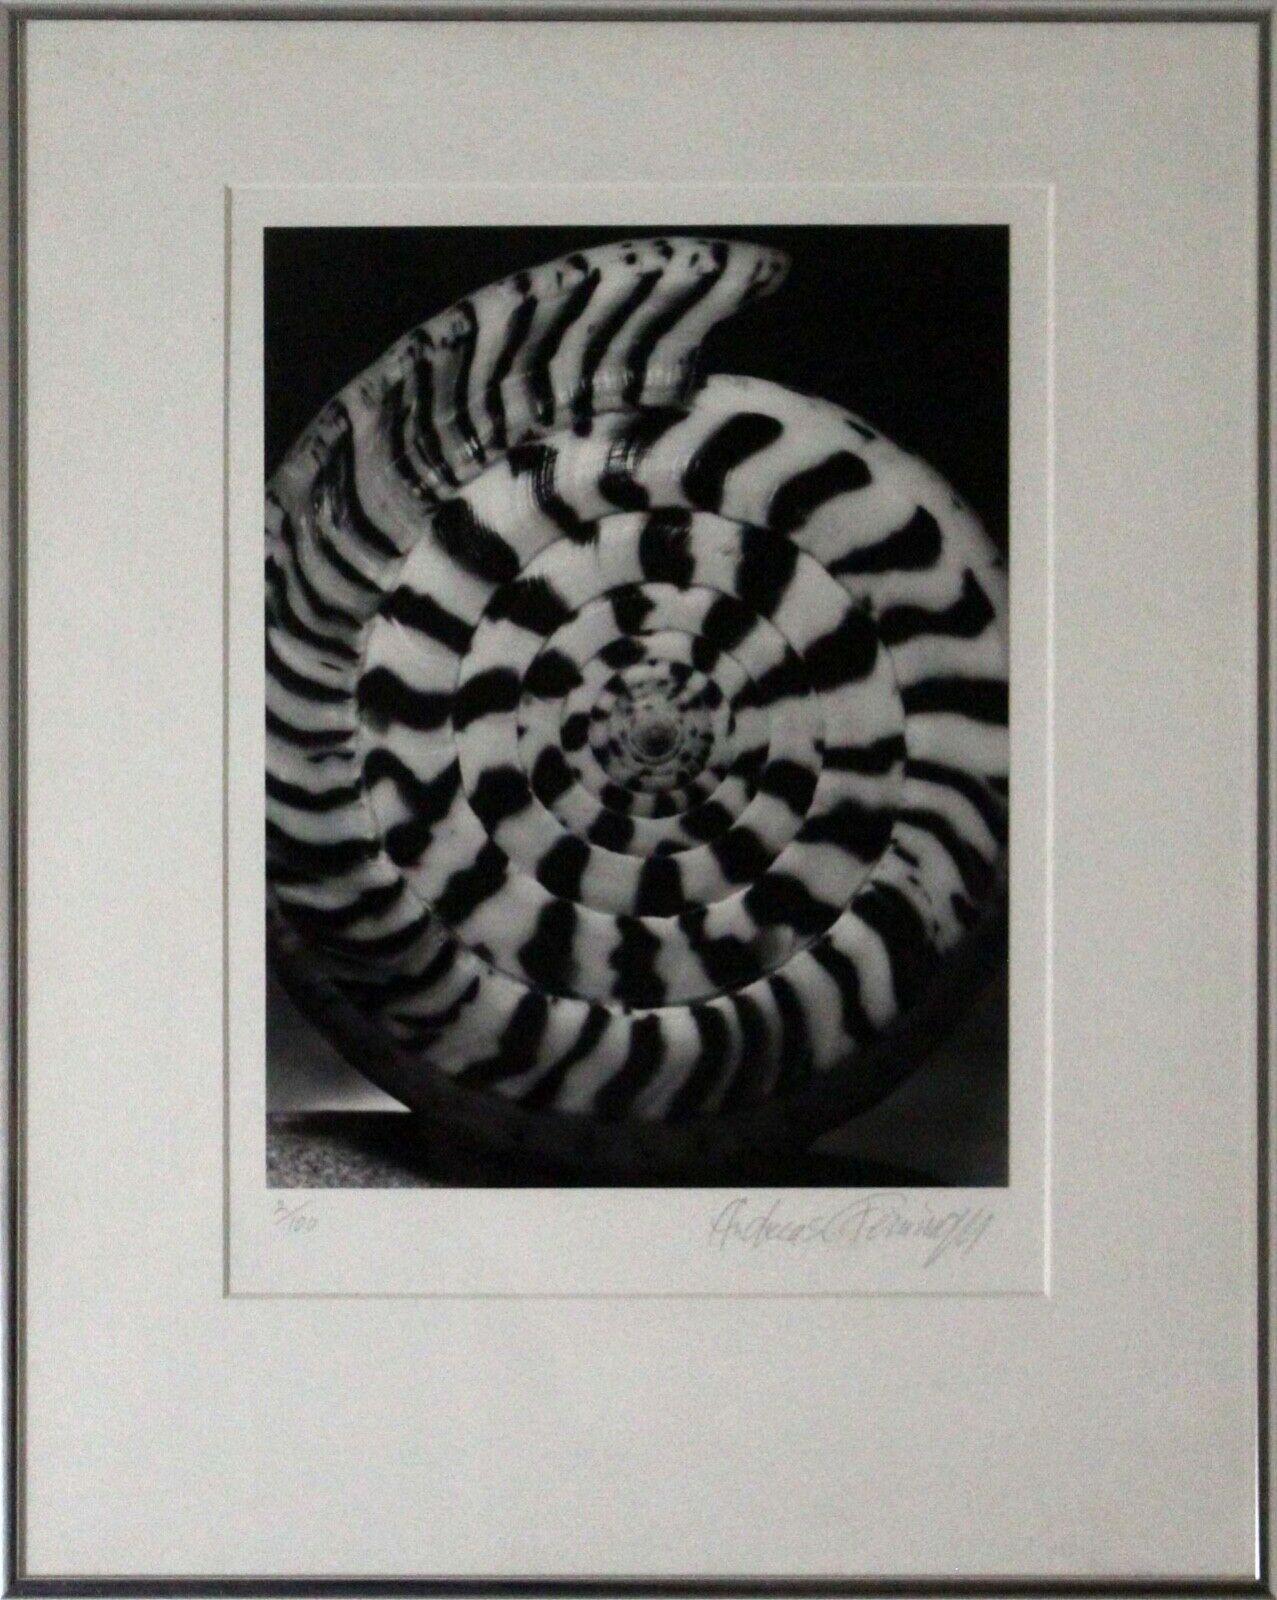 Le Shoppe Too in Michigan is offering this dynamic set of 9 black-and-white gelatin silver prints by American photographer Andreas Feininger. Each print is signed by the artist in pencil on the bottom right with a matching annotation of 2/100 on the